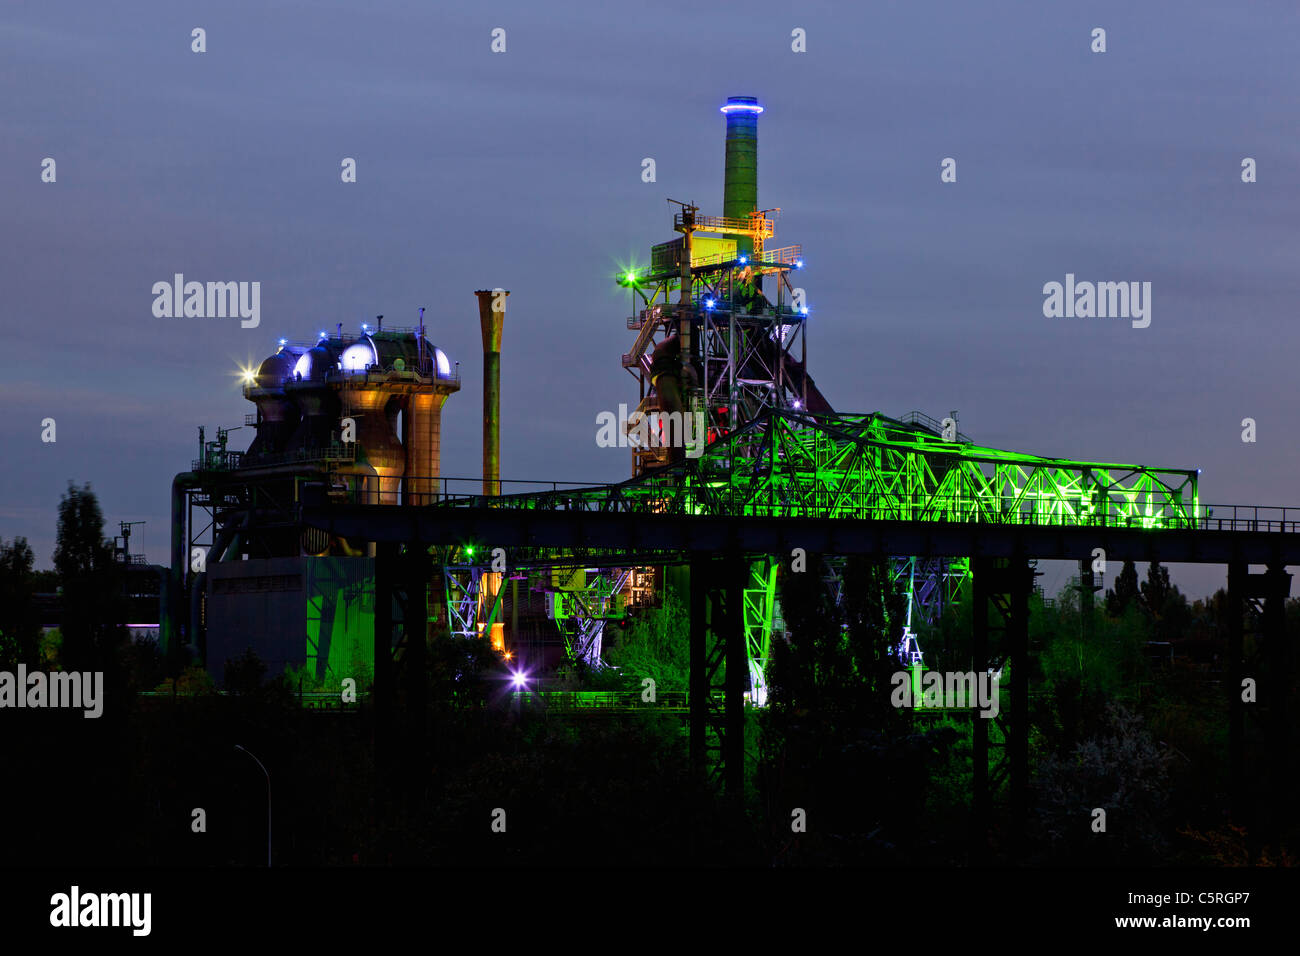 Germany Illuminated blast furnace and smoke stacks of old industrial plant Stock Photo